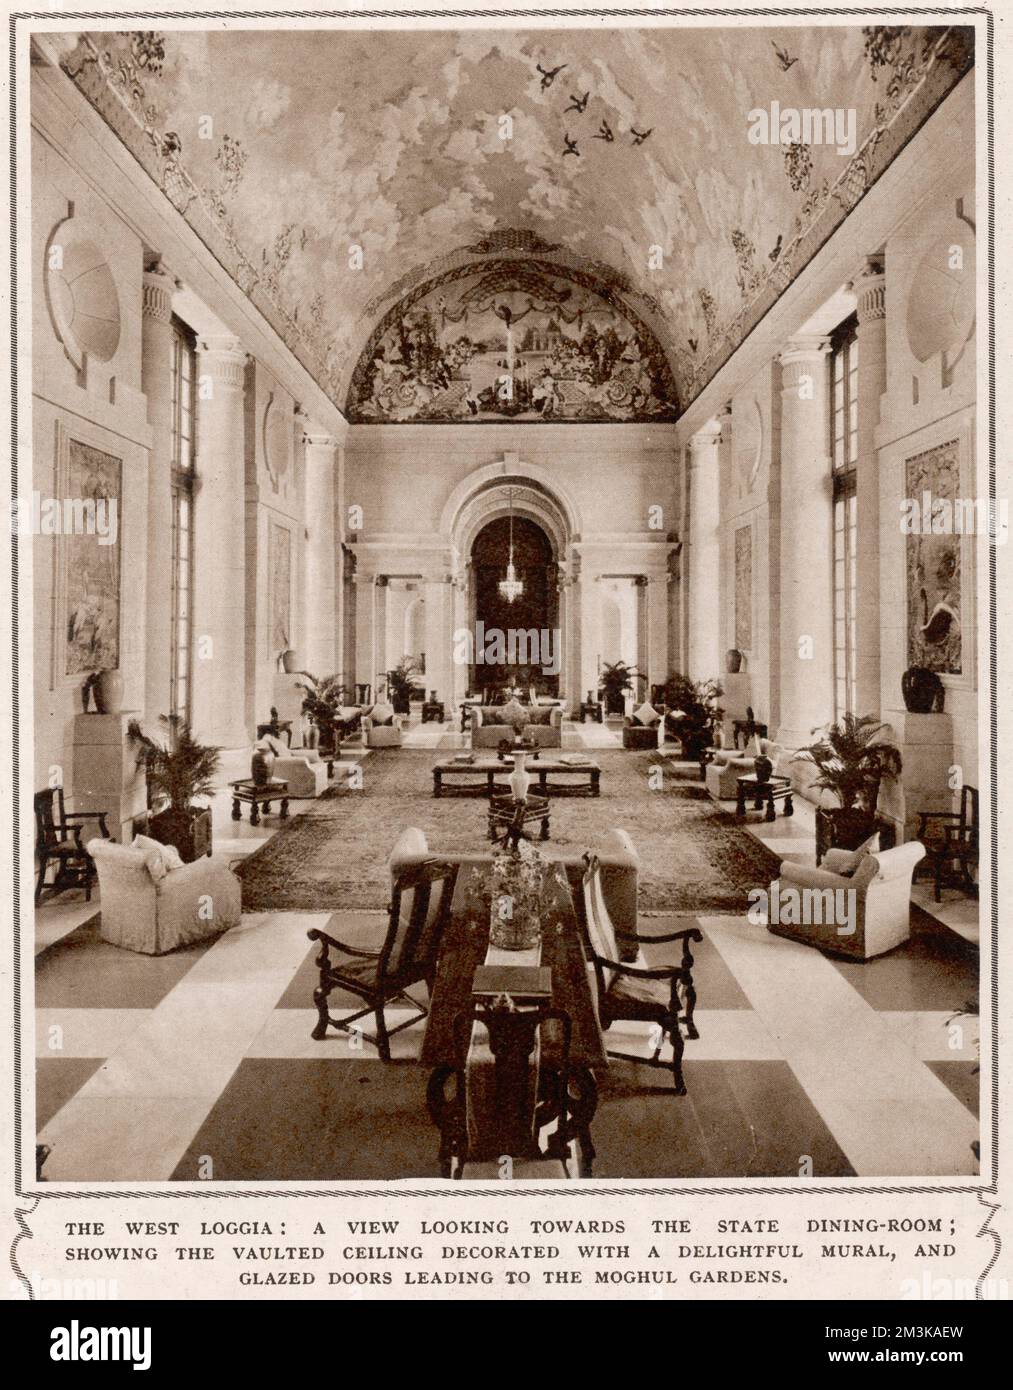 The West Loggia of the Viceroy of India's house in New Delhi, India, with a view looking towards the state dining-room and showing the vaulted ceiling decorated with a delightful mural.  The glazed doors lead to the Moghul Gardens.  1935 Stock Photo